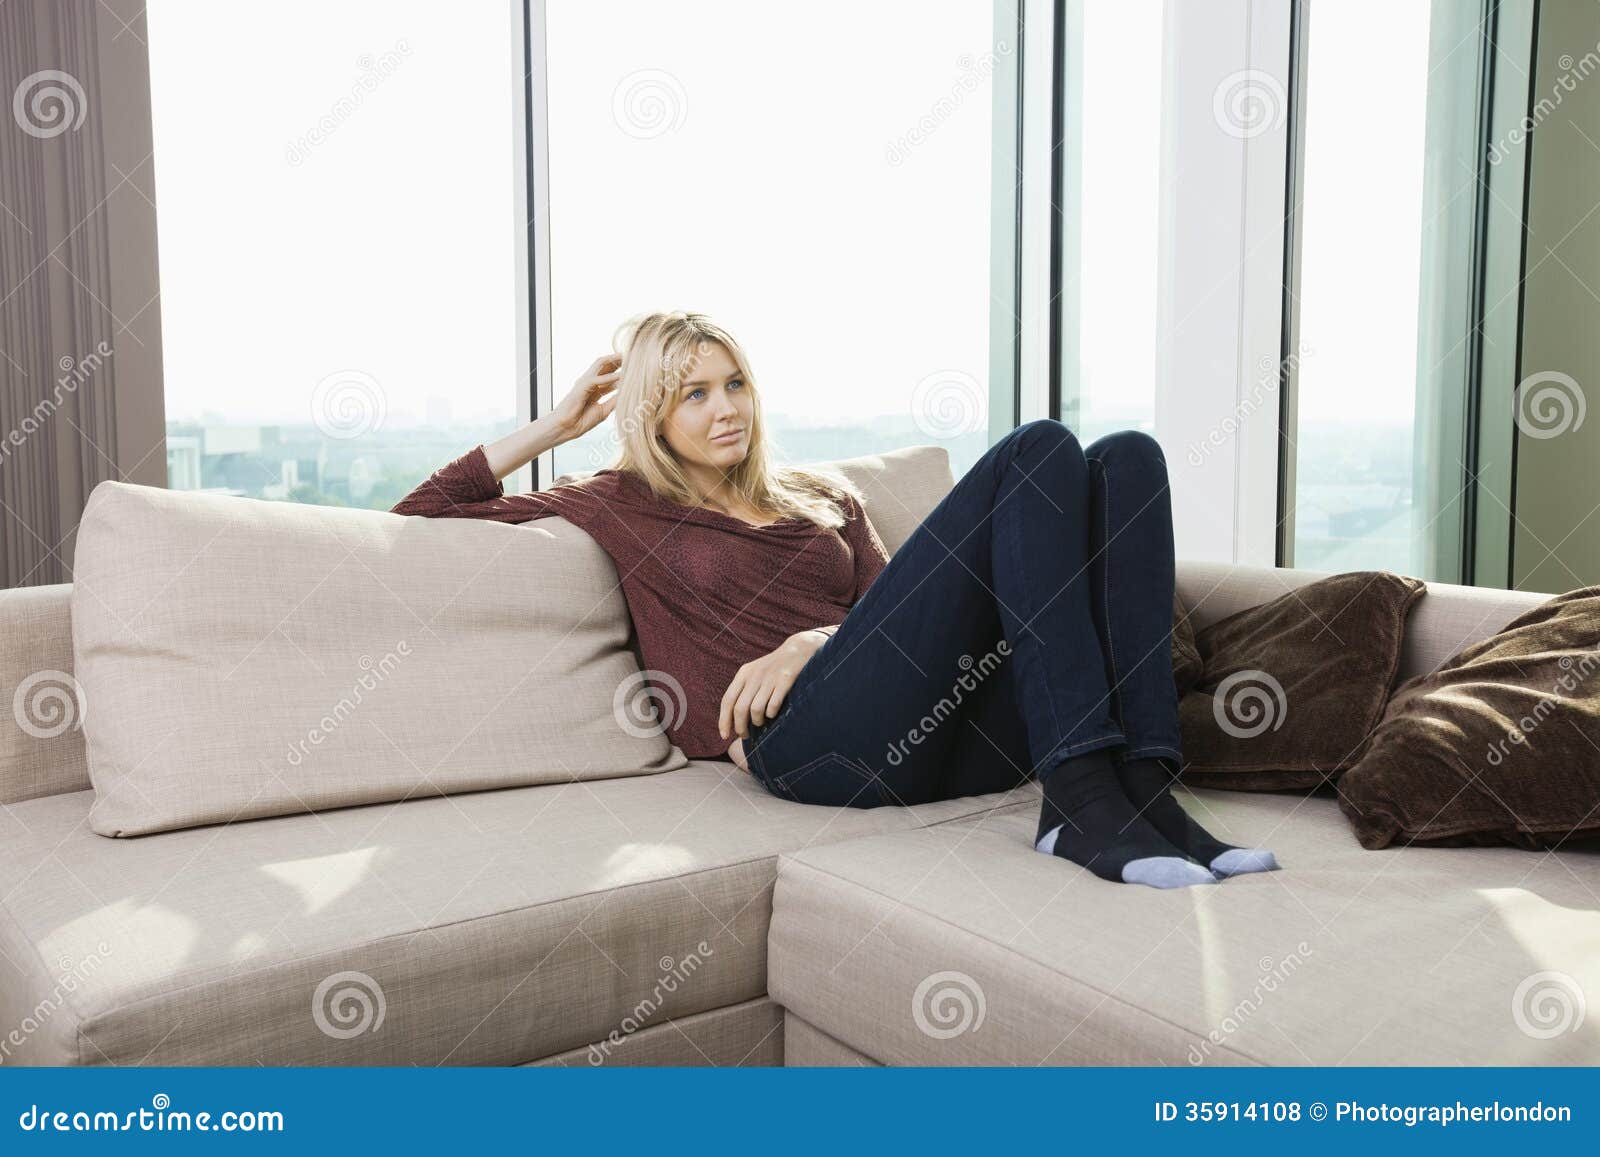 thoughtful young woman sitting on sofa against window at home